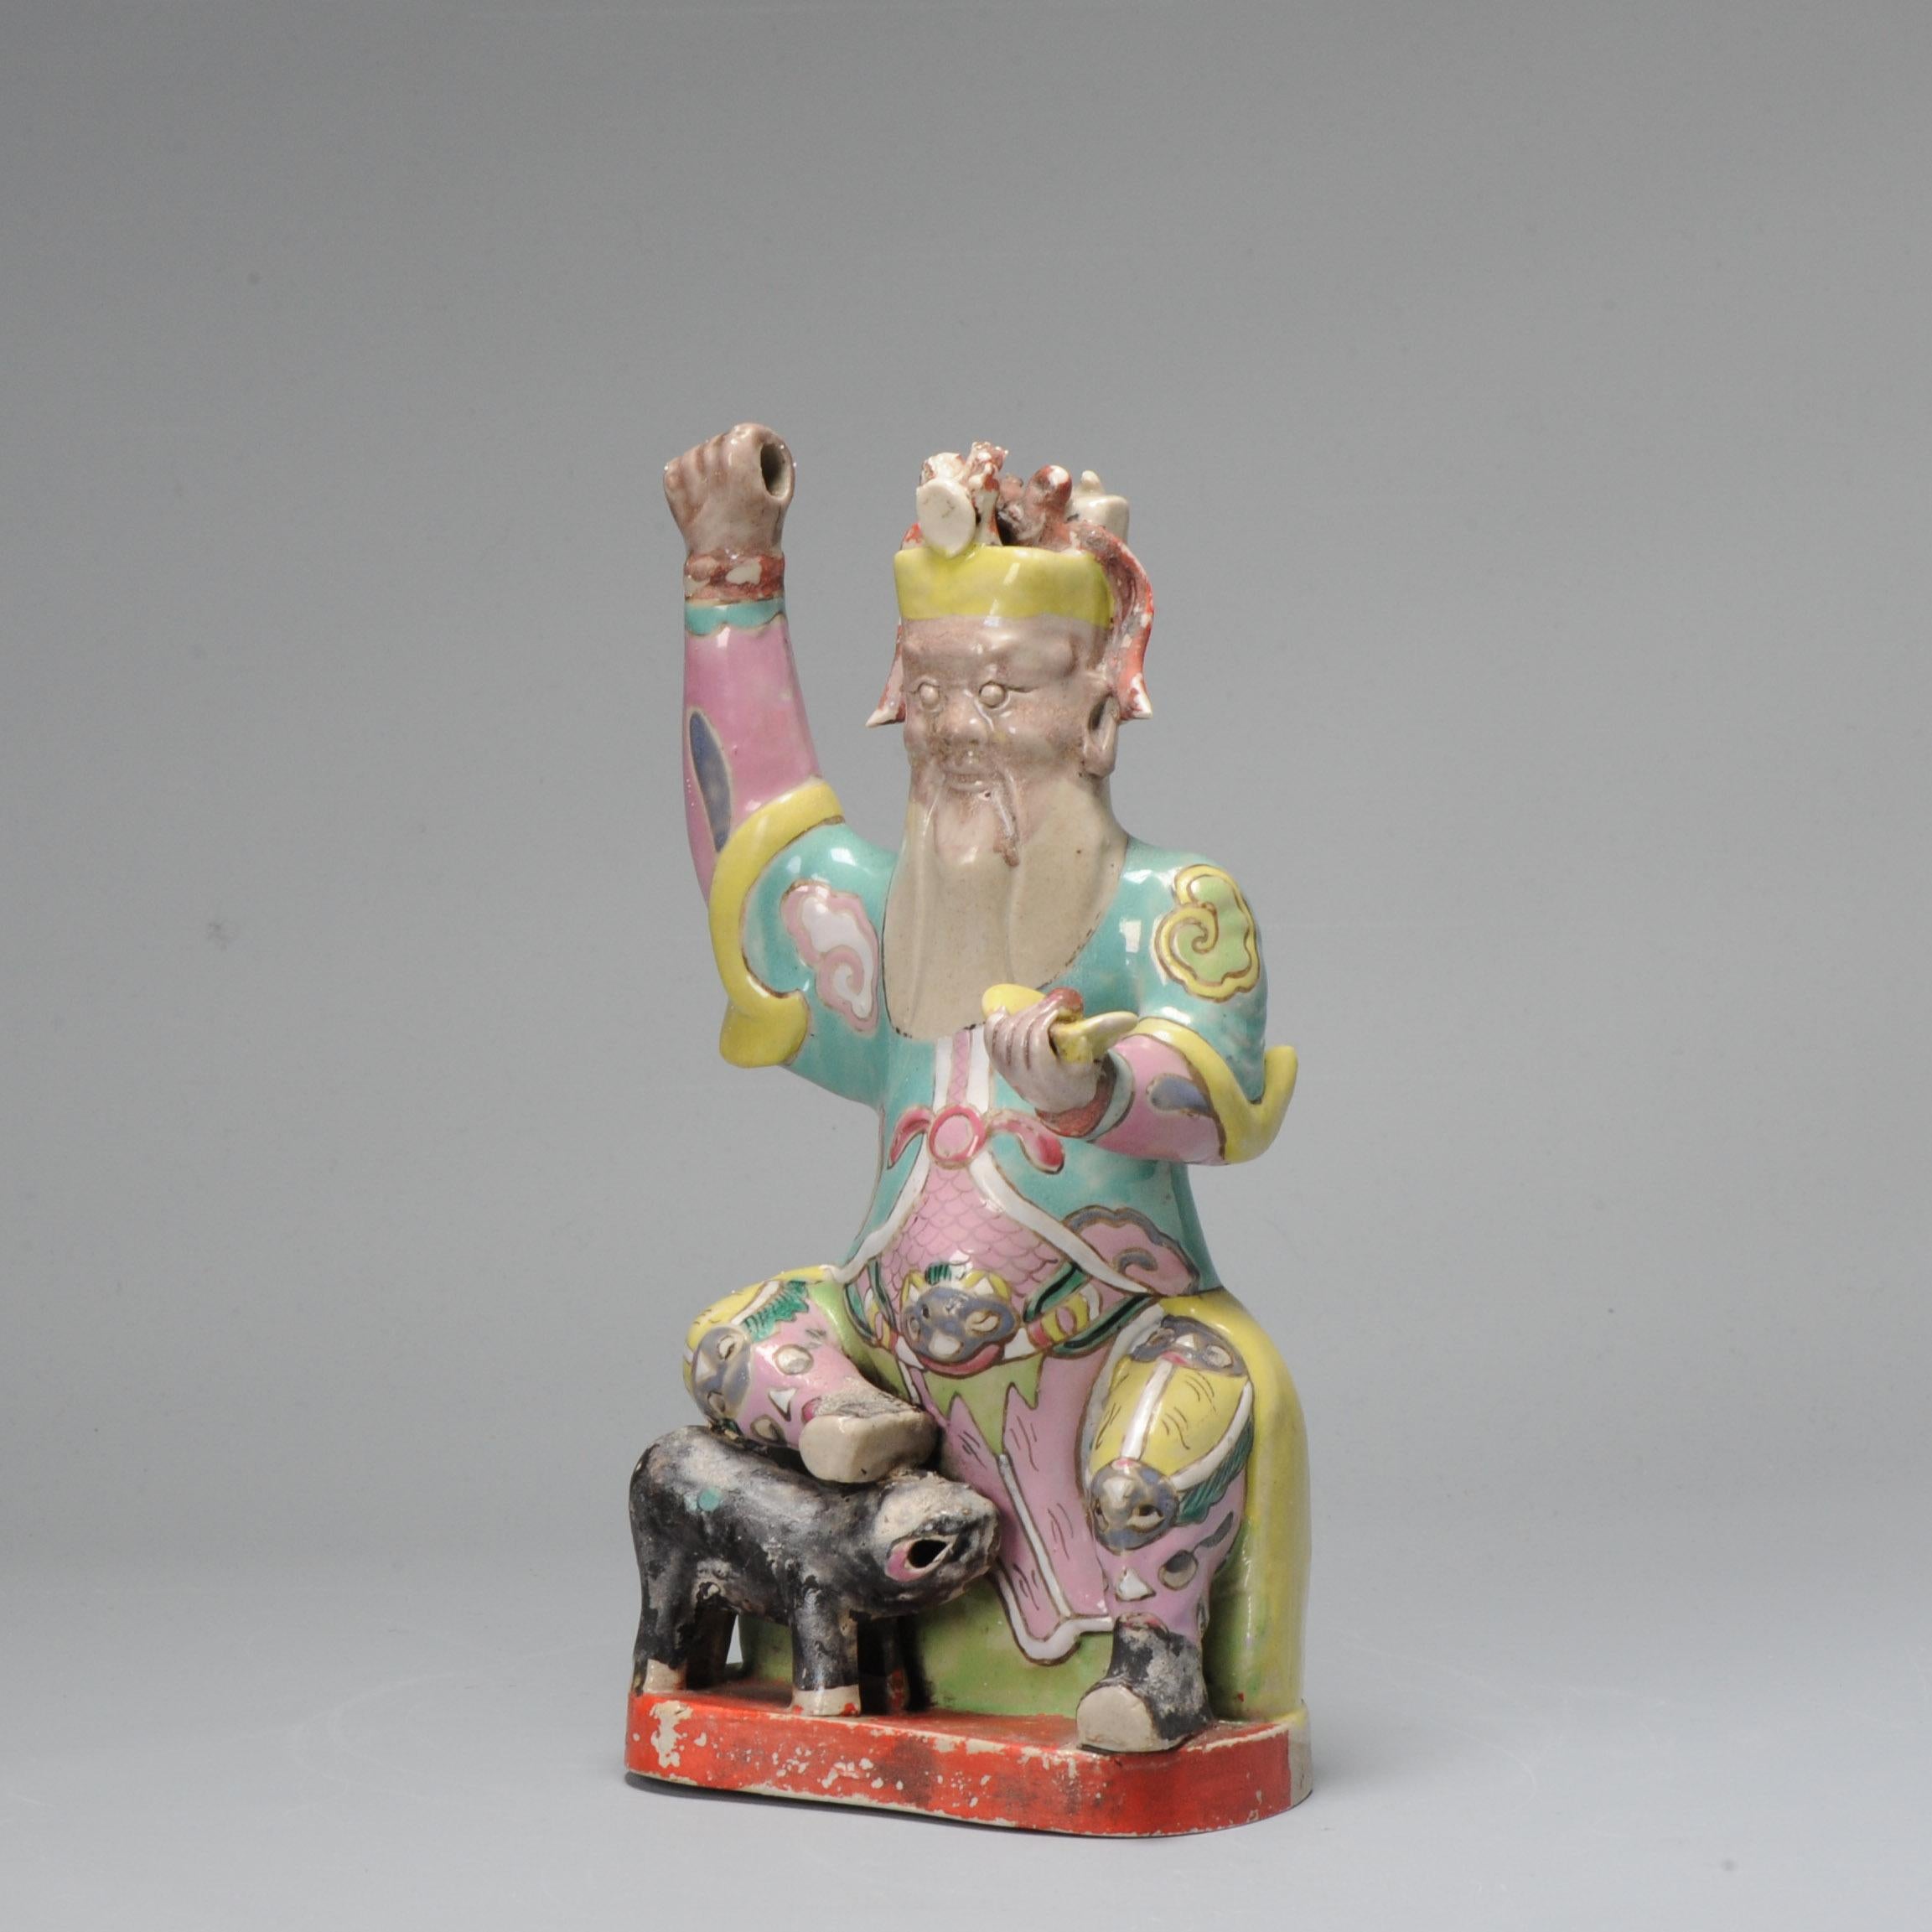 Qing Antique 18th C Chinese Statue Porcelain Figure Chinese Military God of Wealth